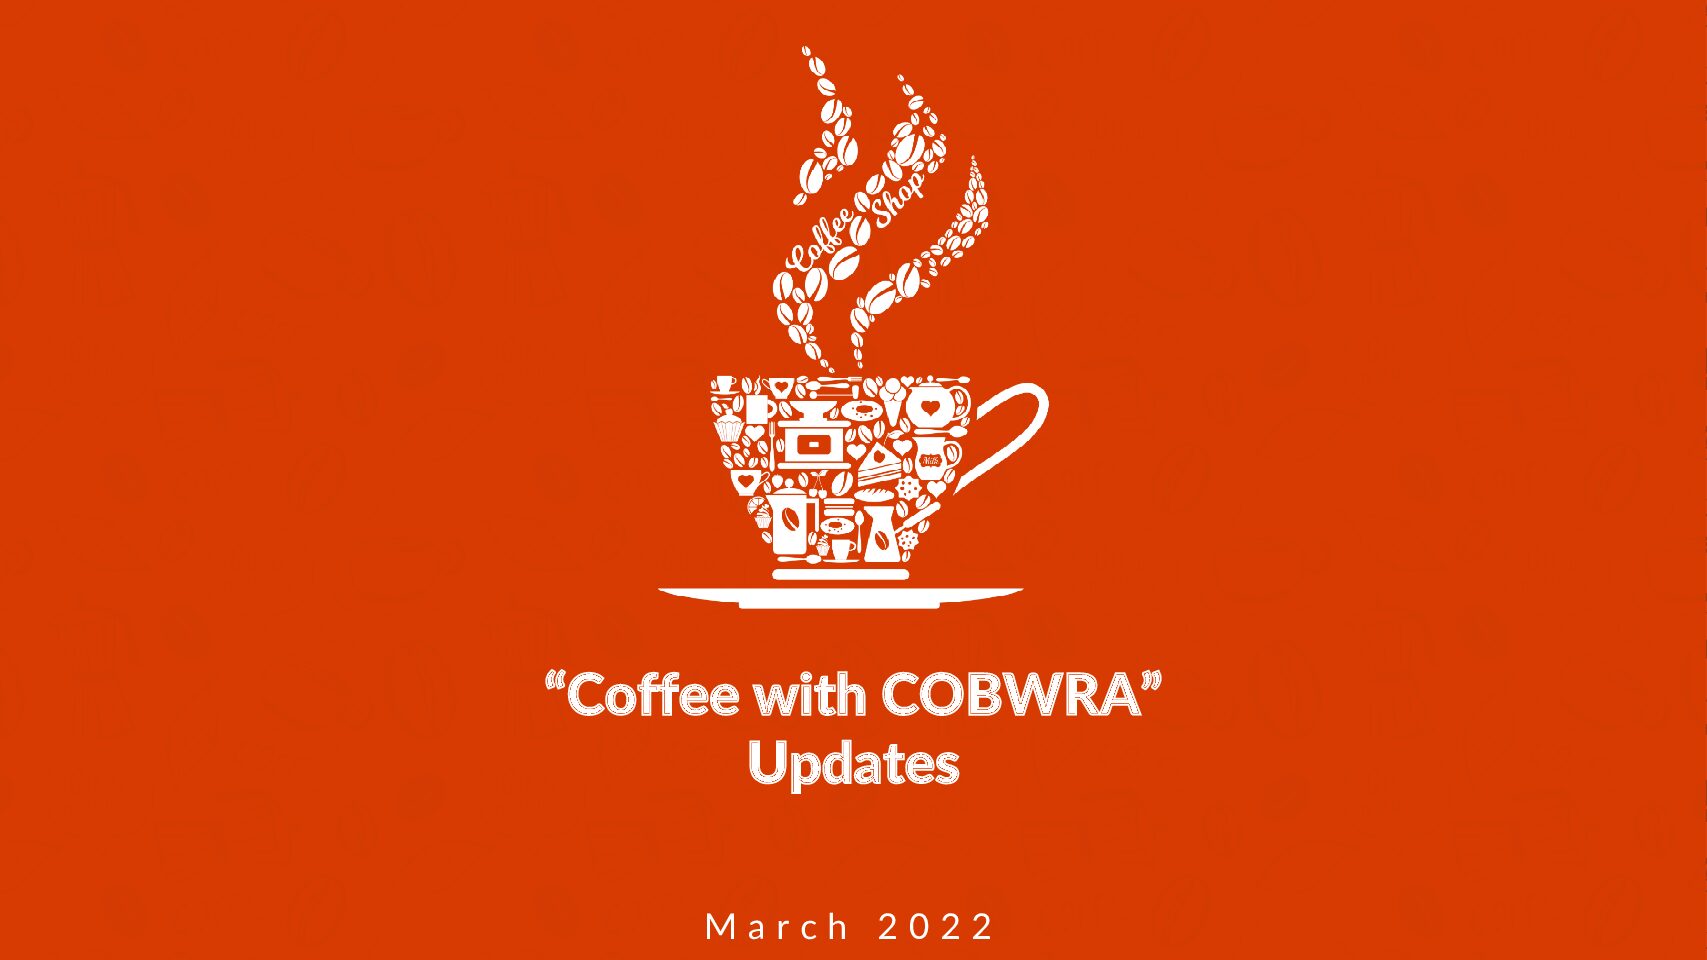 Coffee with COBWRA - Update March 2022